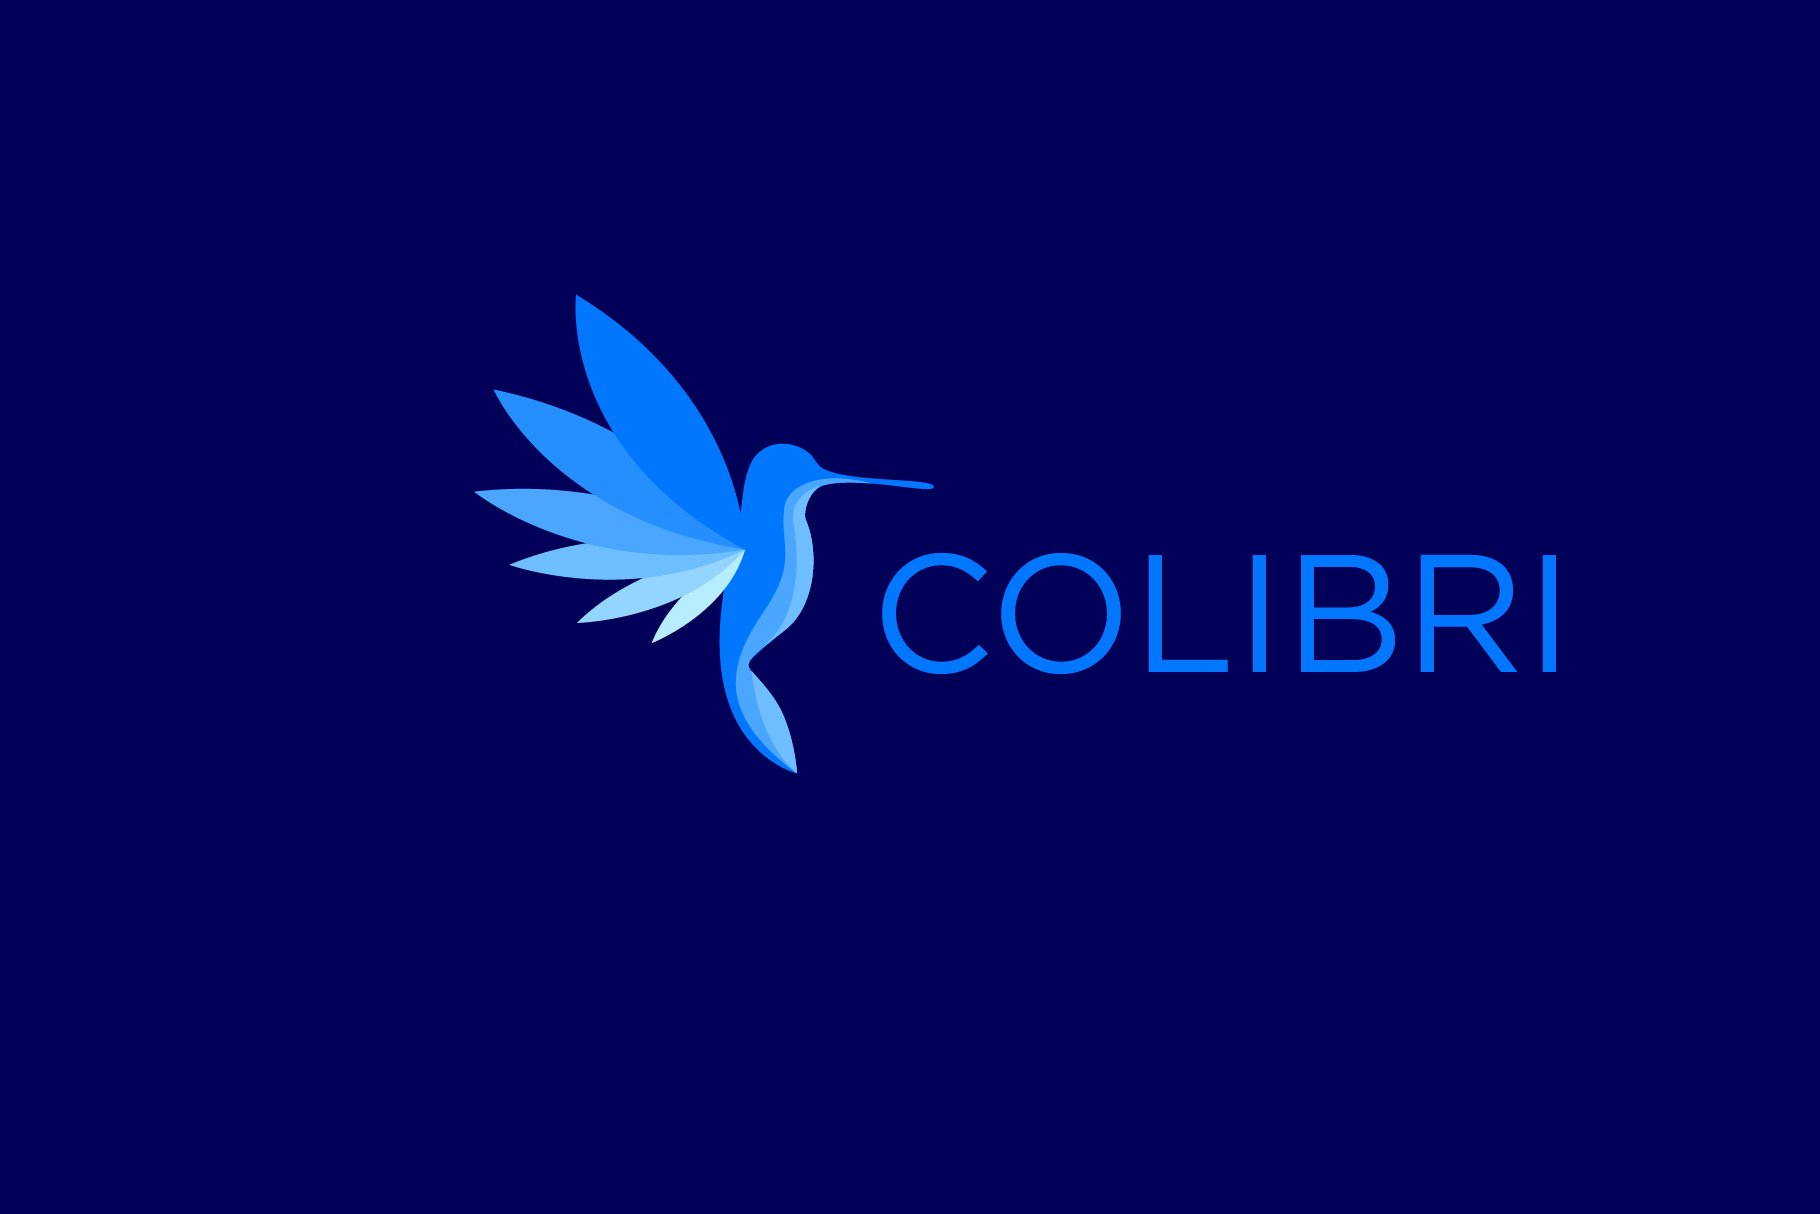 Colibry or Humming Bird Logo cover image.